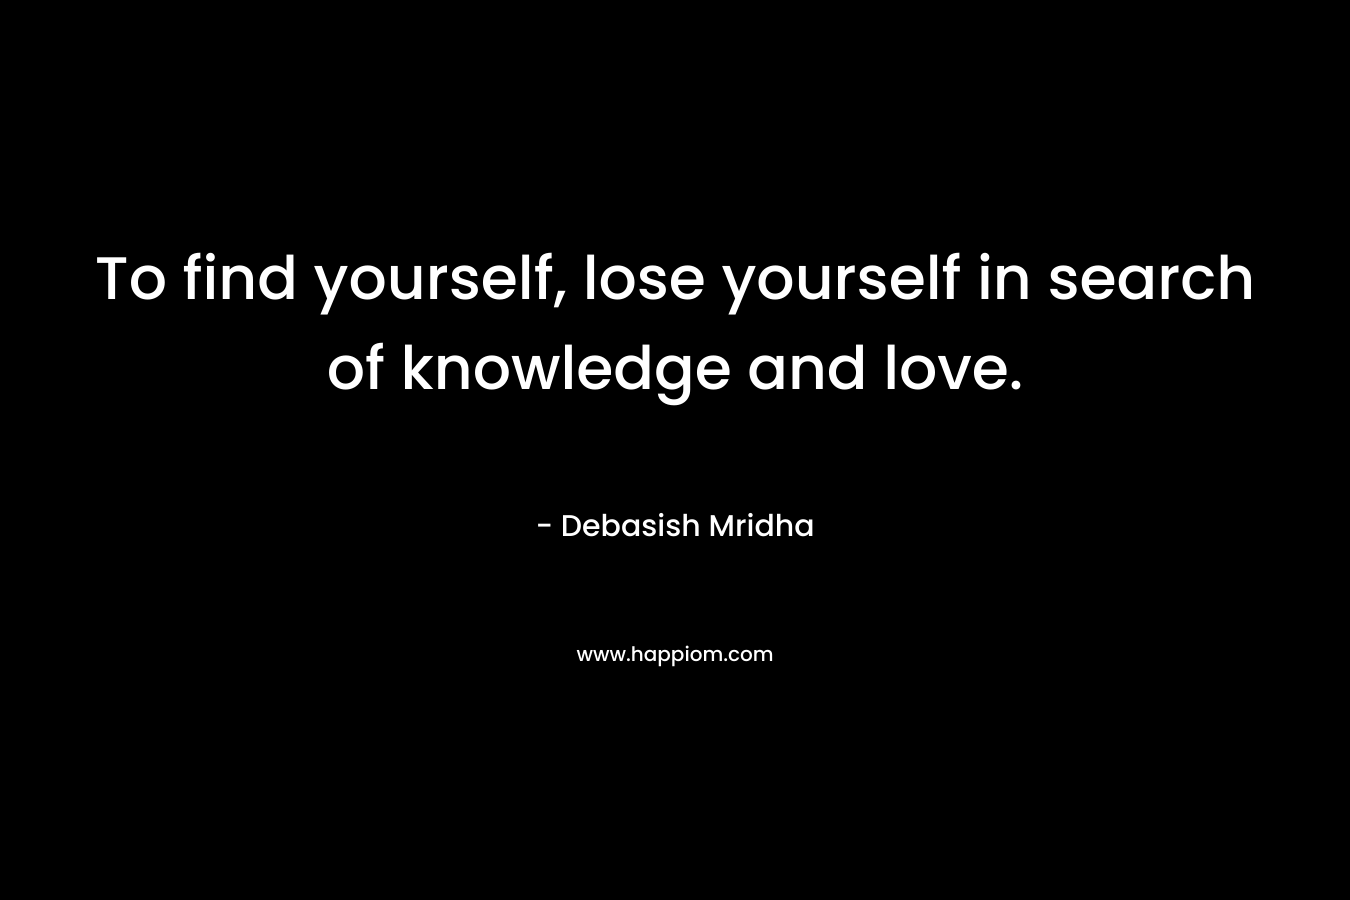 To find yourself, lose yourself in search of knowledge and love.